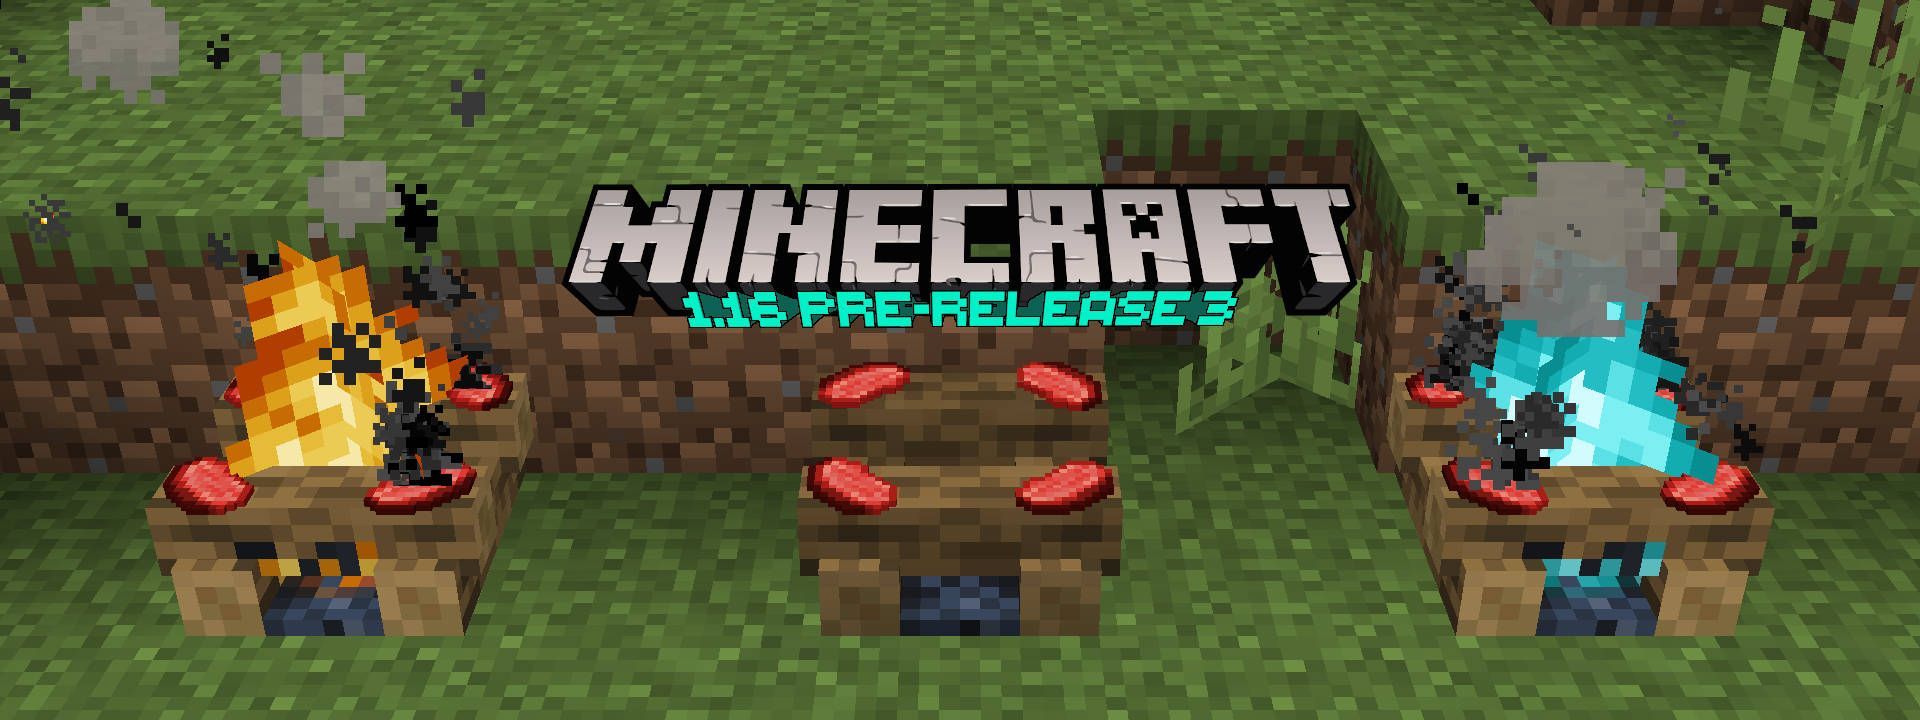 If you put the minecraft classic texture pack, the Zombifield Piglin become  the Zombie Pigman again! : r/Minecraft